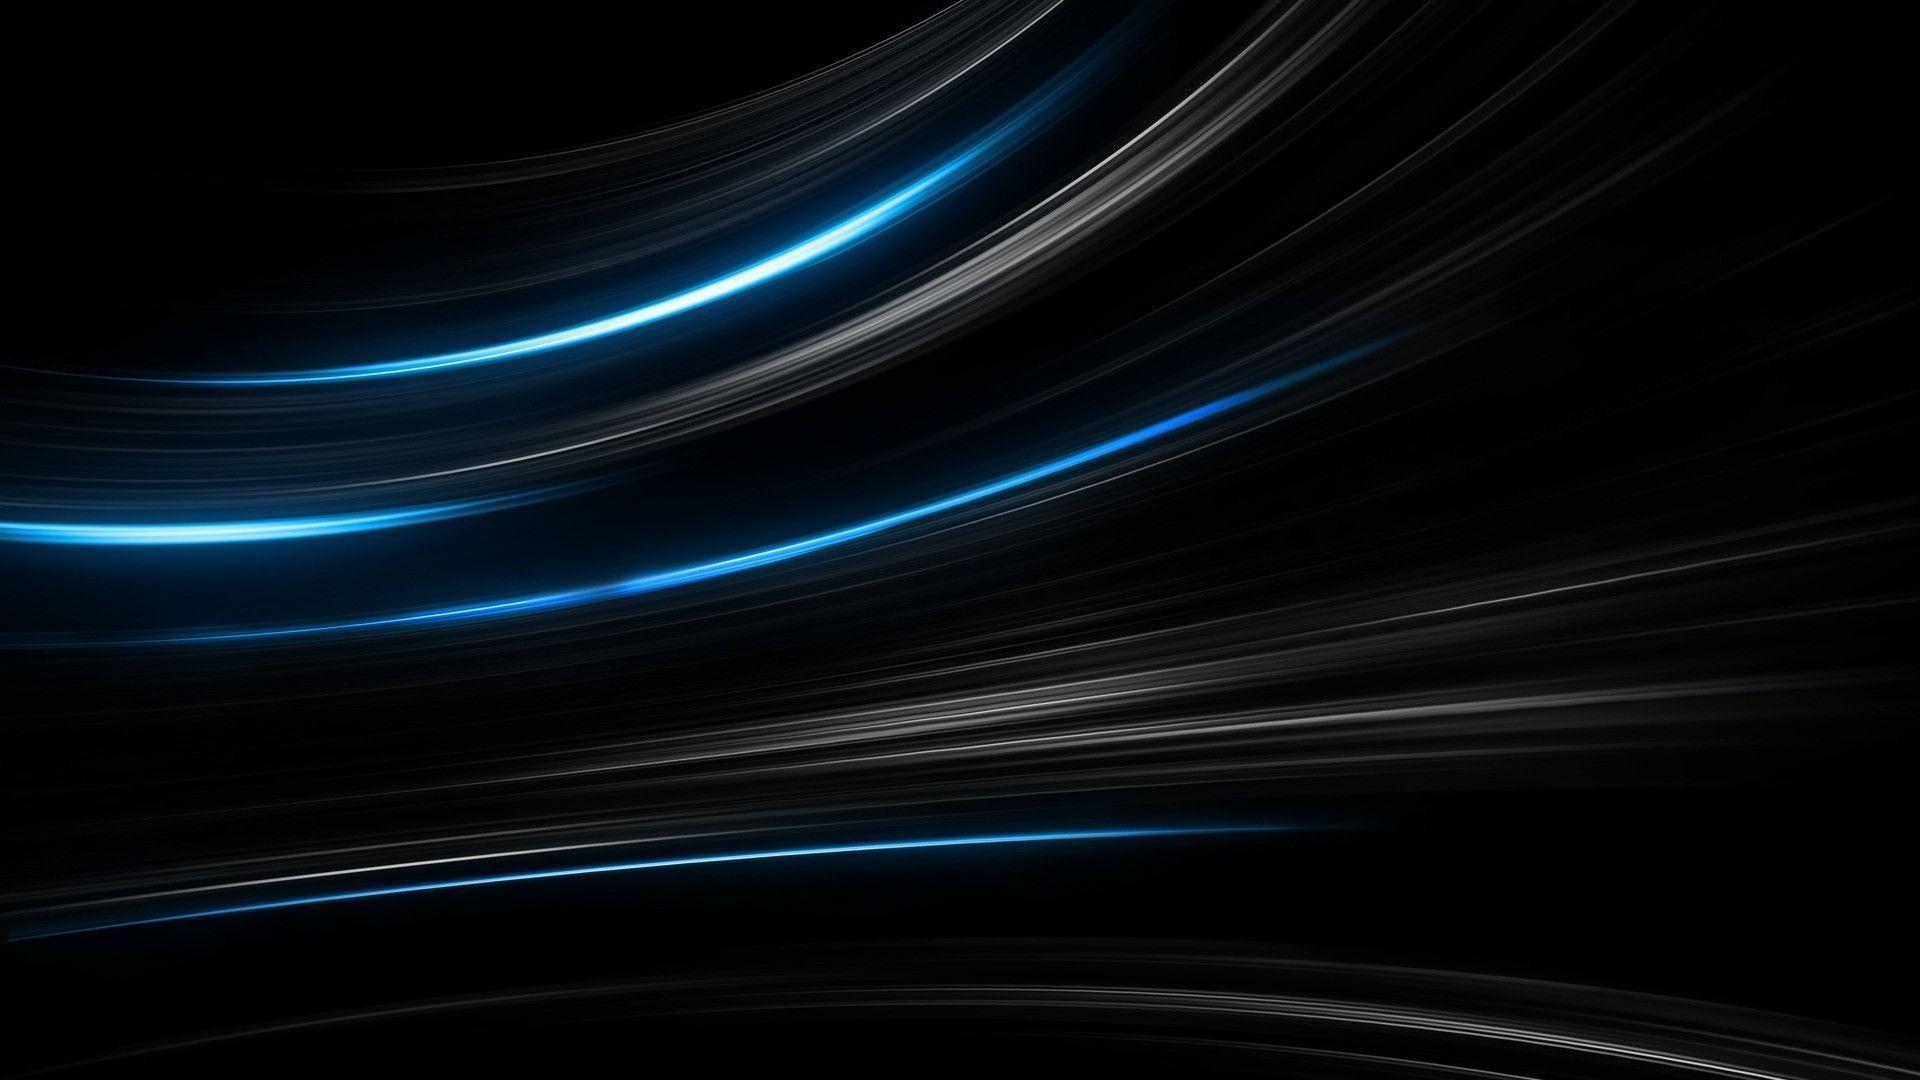 Wallpaper For > Black And Blue Abstract Wallpaper